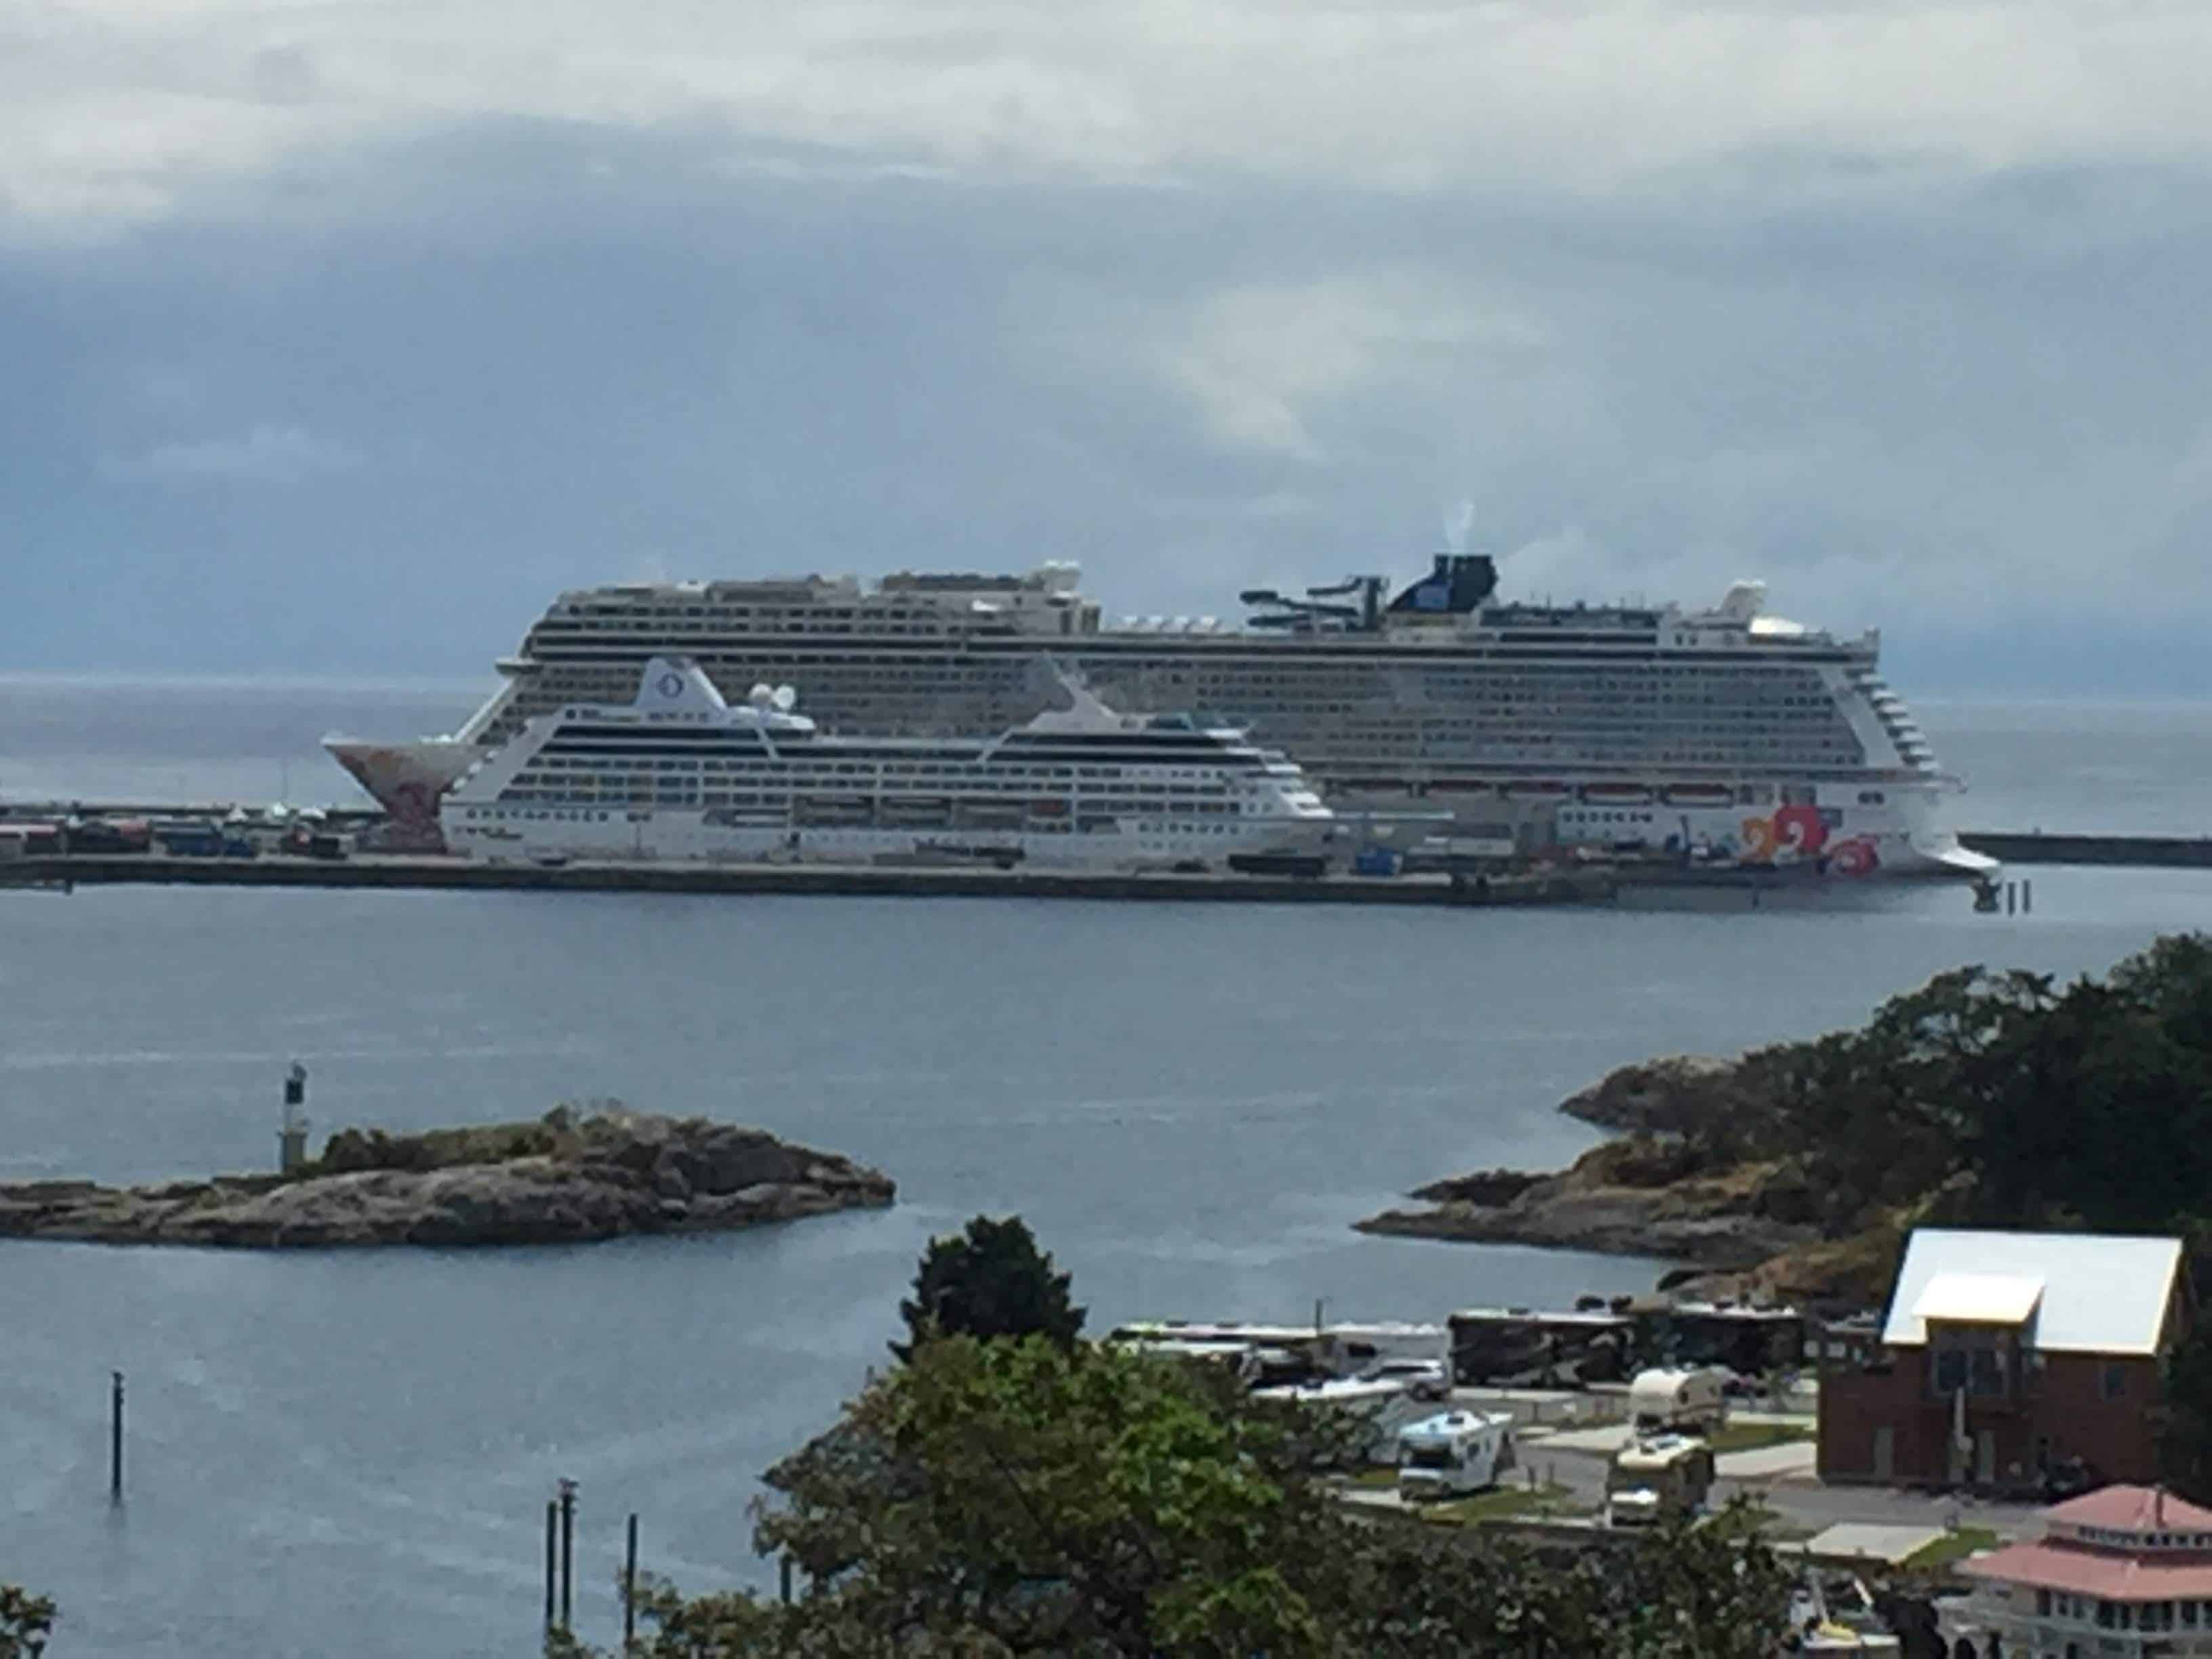 Cruise Ships at Ogden Point Victoria BC June 2019